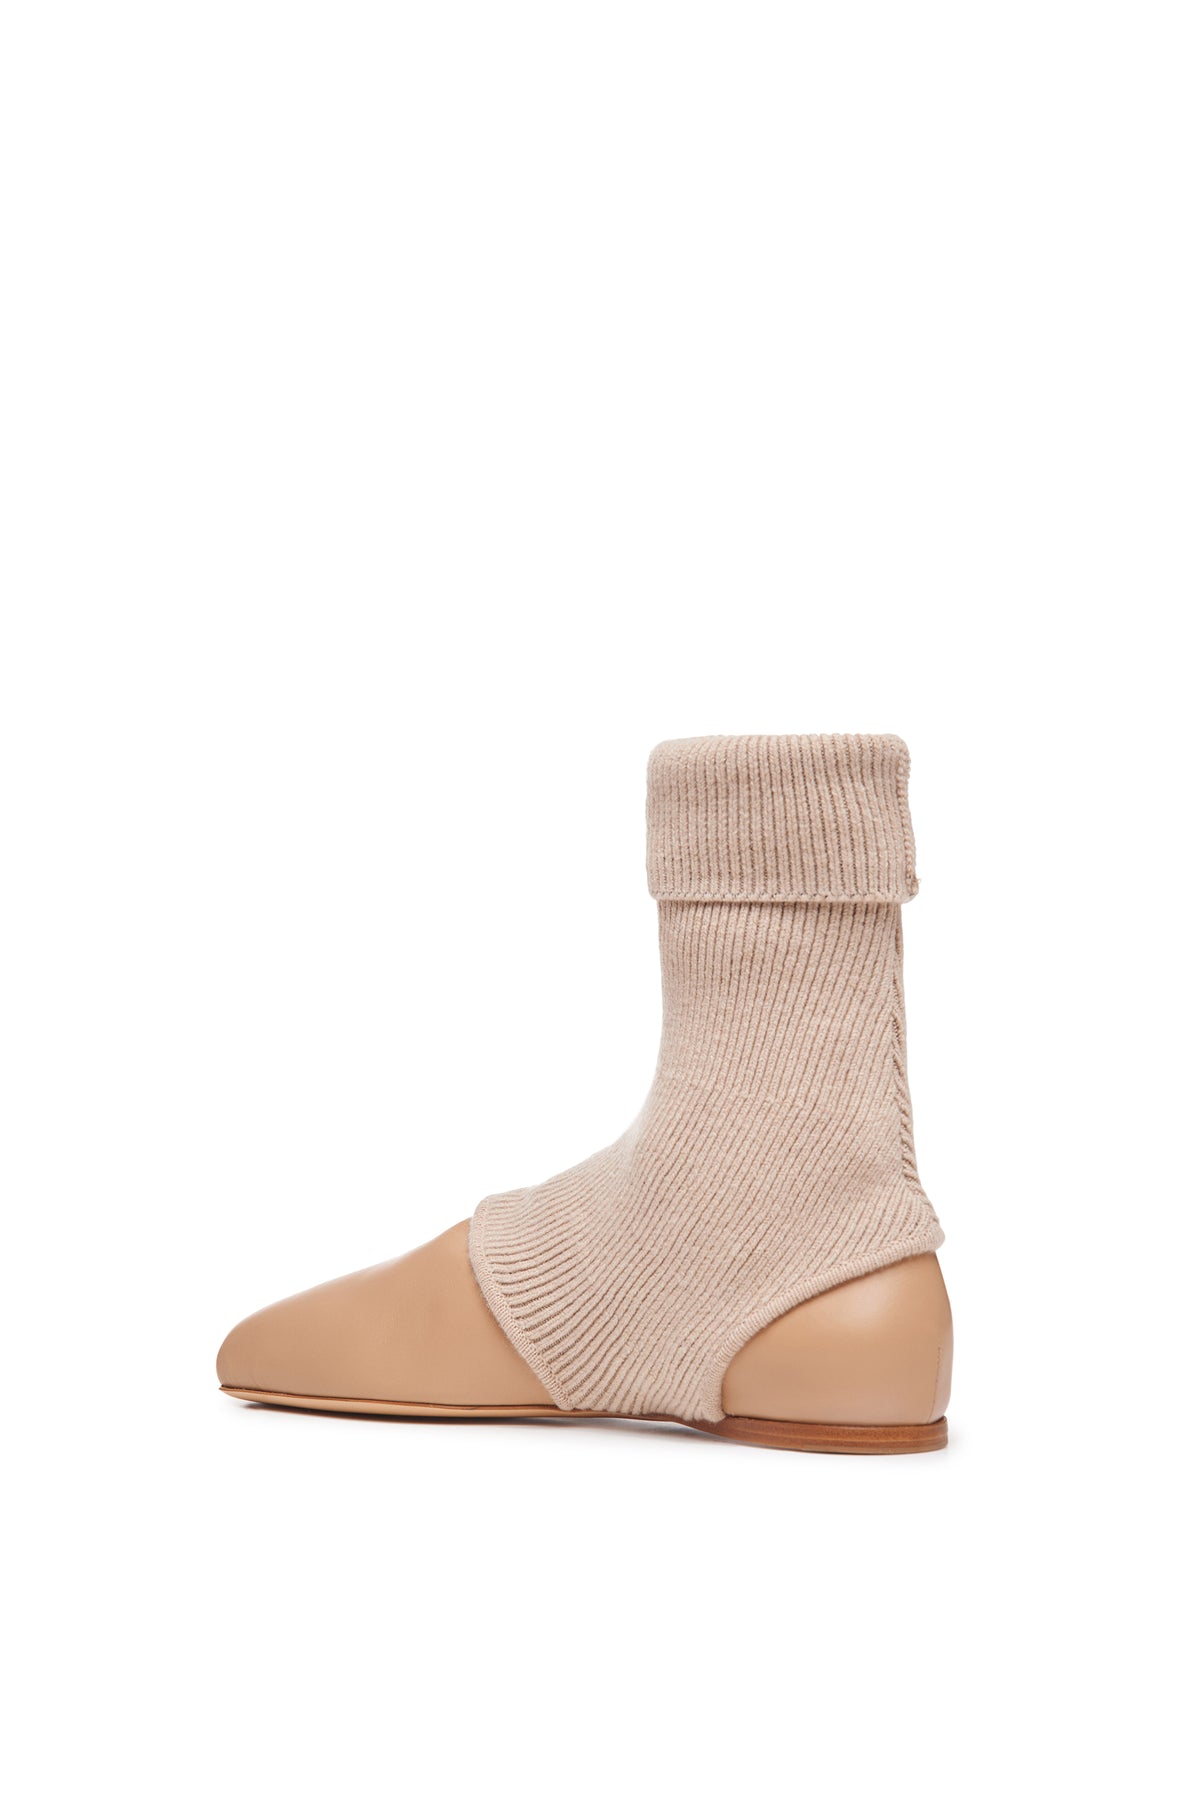 Mishka Ankle Sock Boot in Dark Camel Cashmere Leather